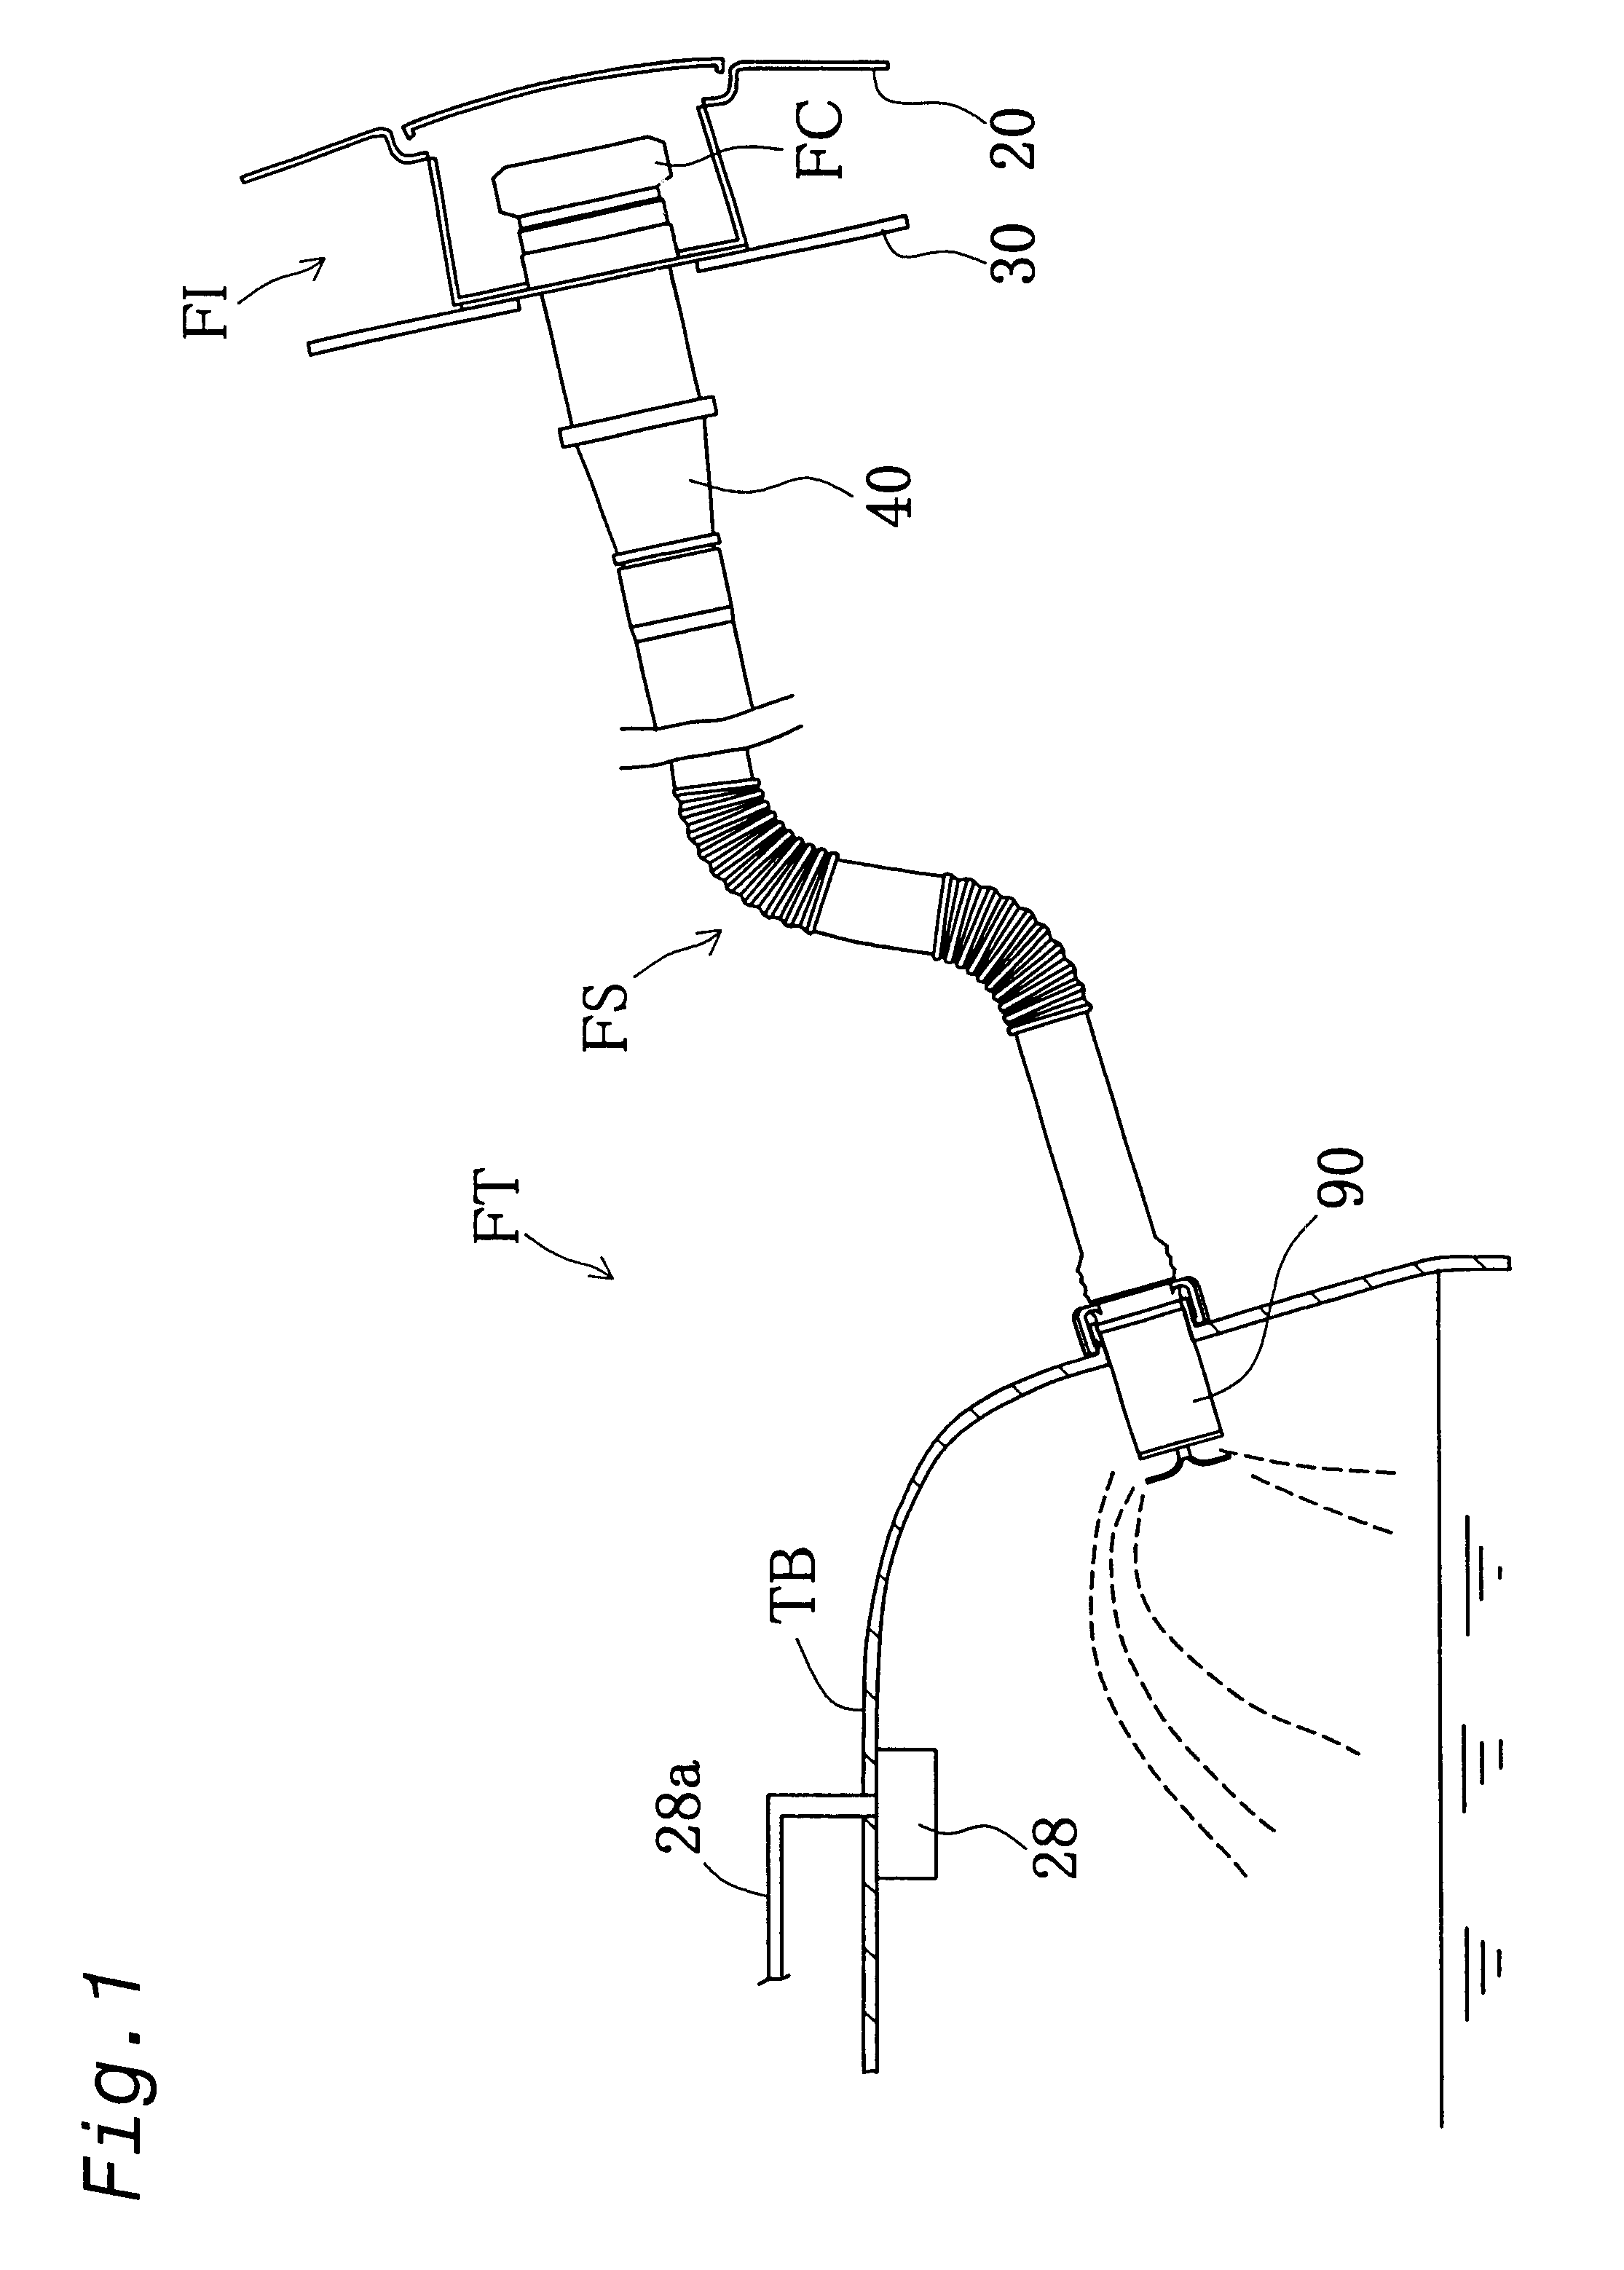 Fuel tank and fuel feeding apparatus used therefor